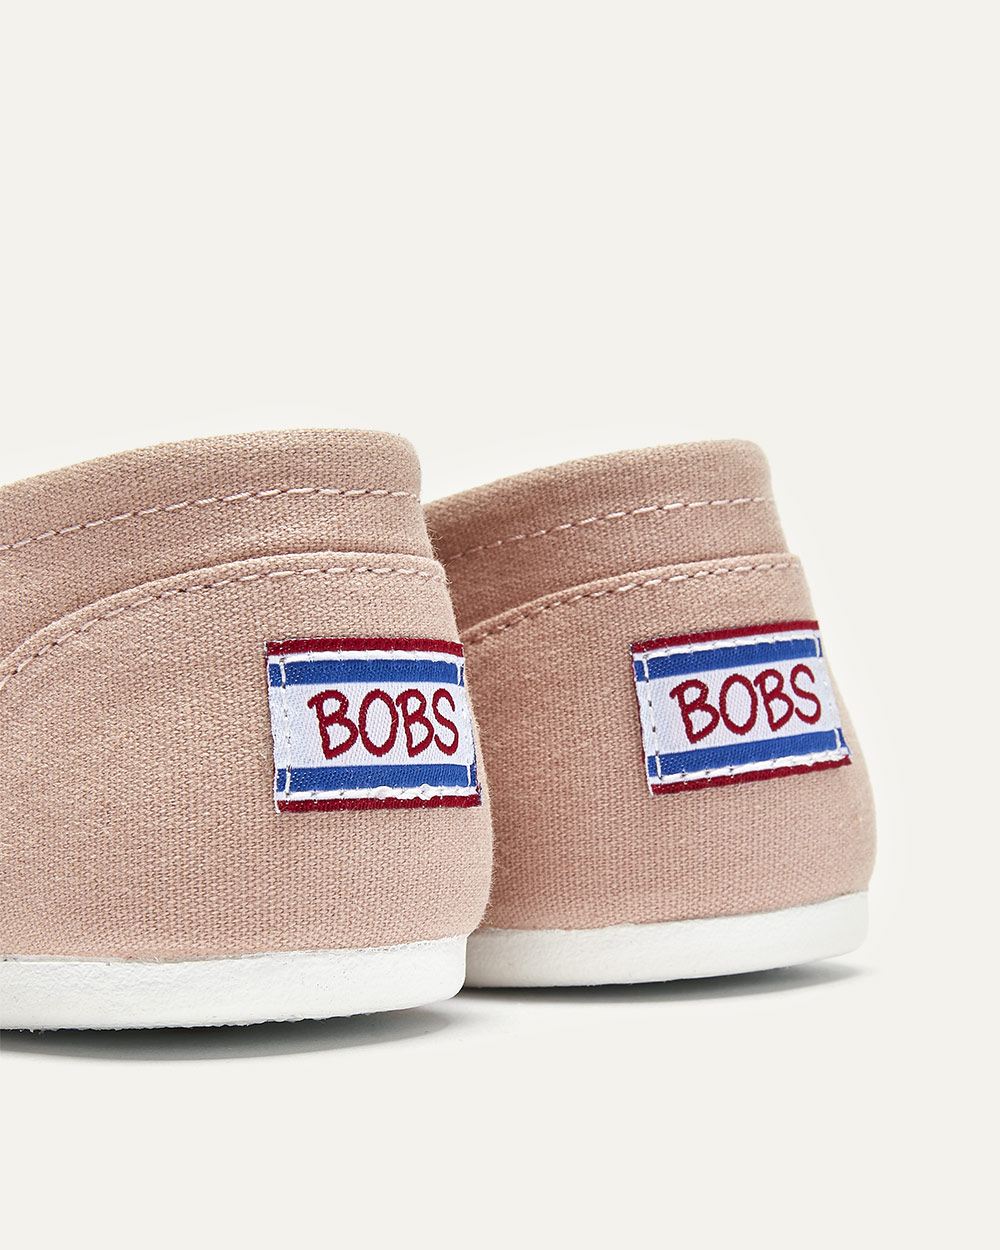 do bobs shoes come in wide width